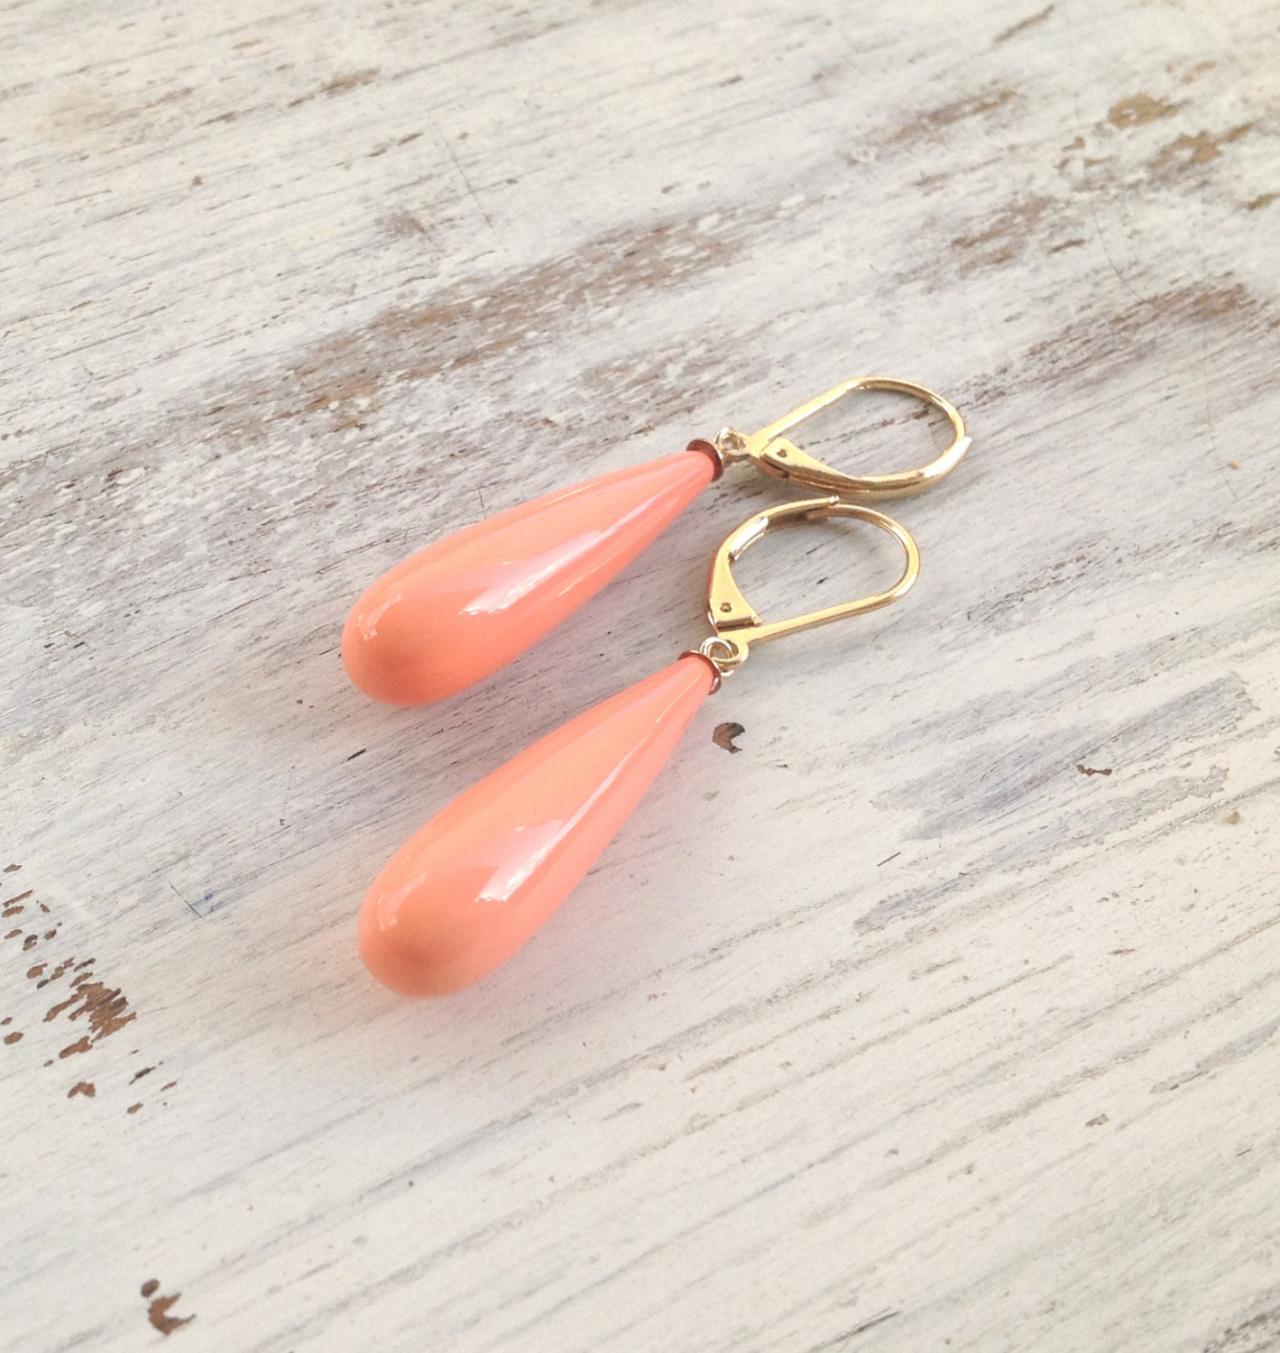 Coral Earrings, Gold Coral Earrings, Wedding Jewelry, Bridesmaid Gift, Delicate Earrings, Light Orange, Coral Jewelry 814